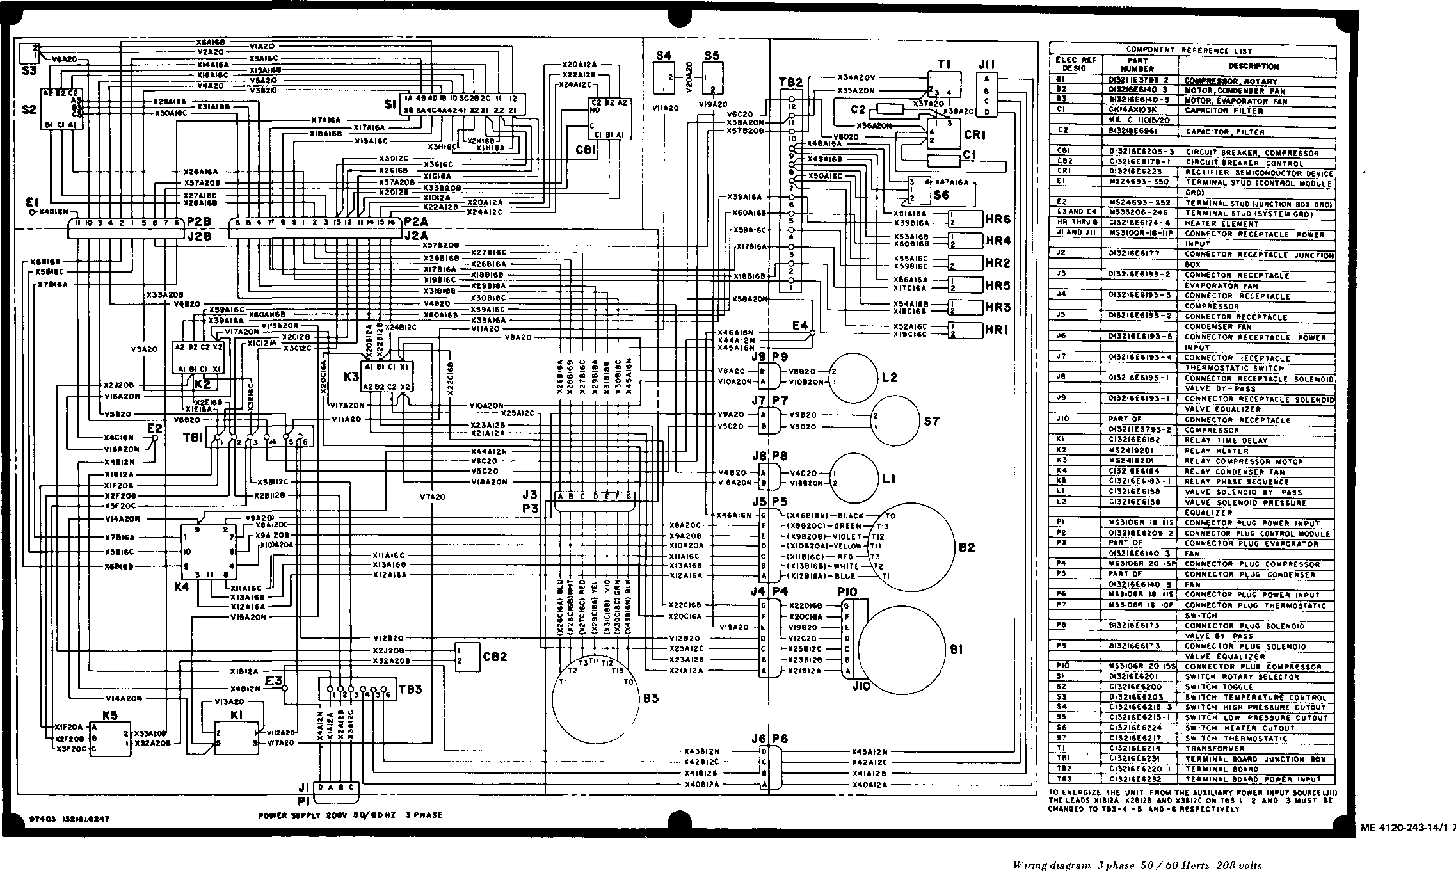 208 Volt 3 Phase Wiring Diagram from airconditioningmanuals.tpub.com